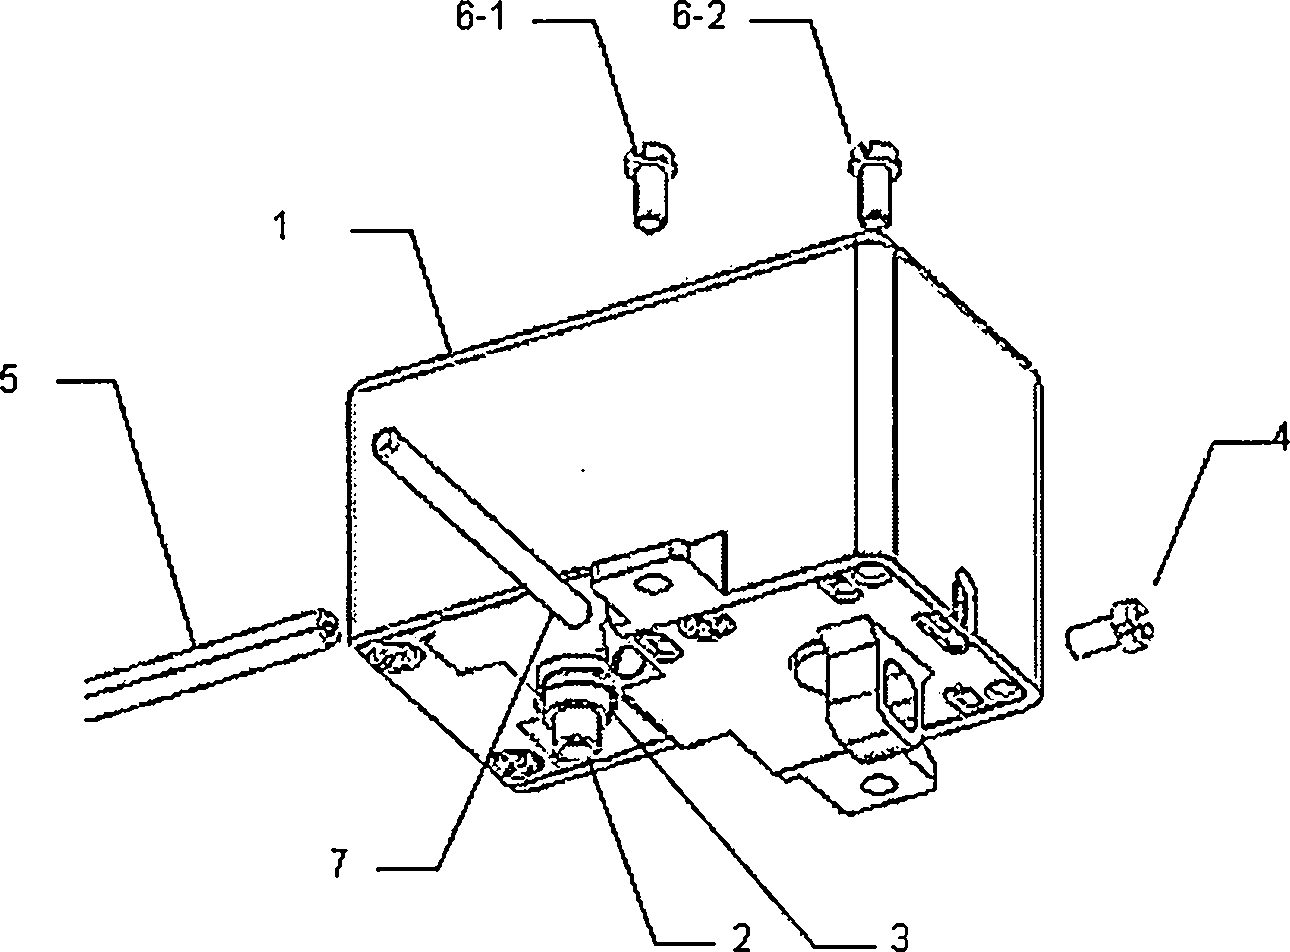 Vertical electronic lock used for conduction charging